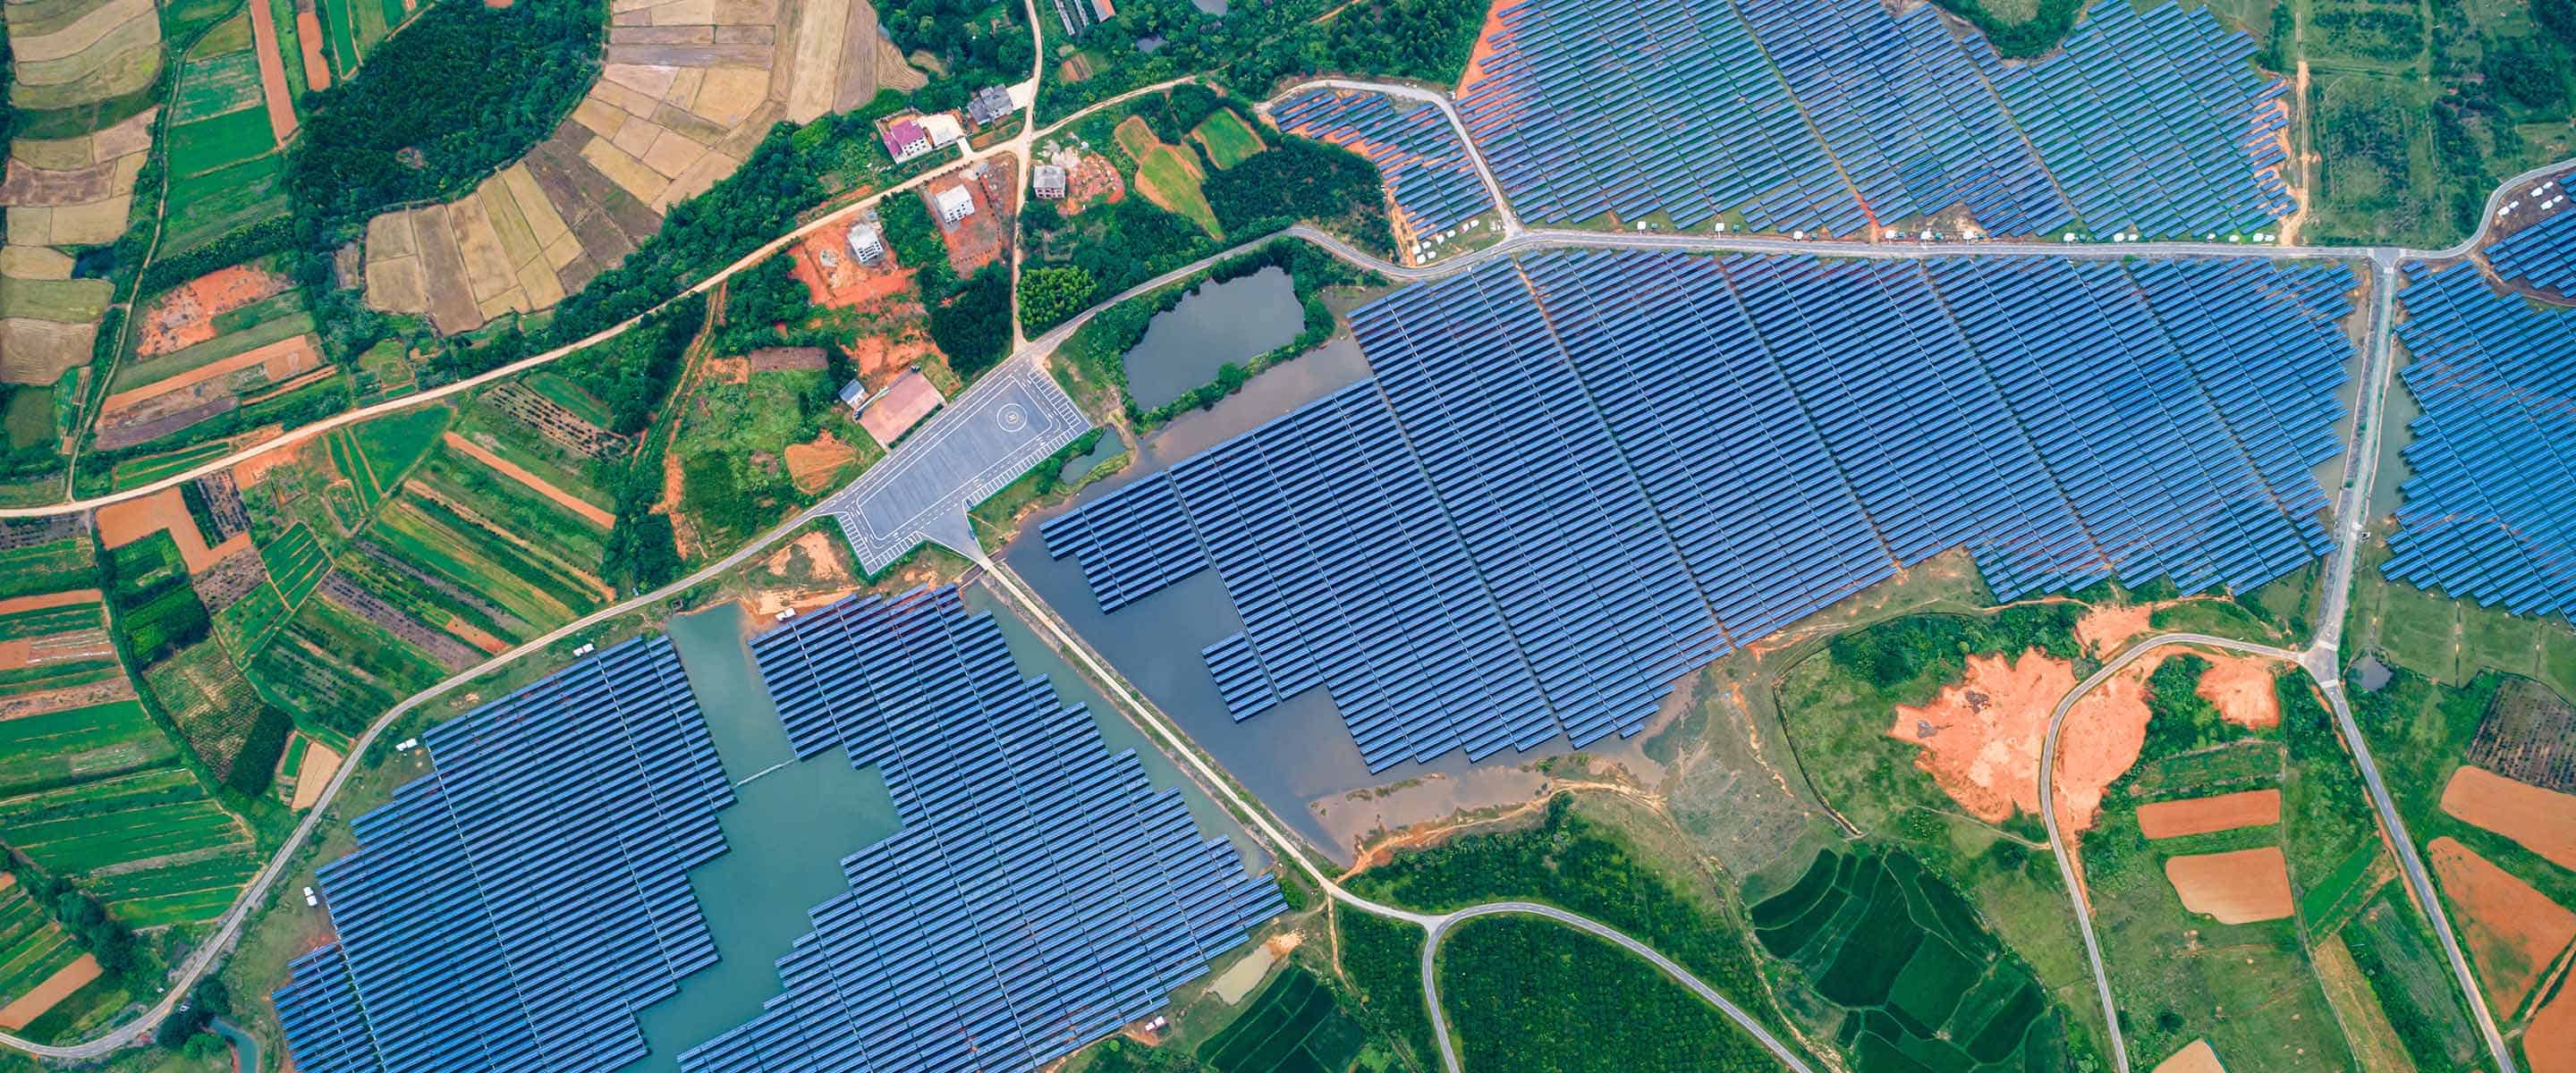 Overhead image of a field with solar panels.